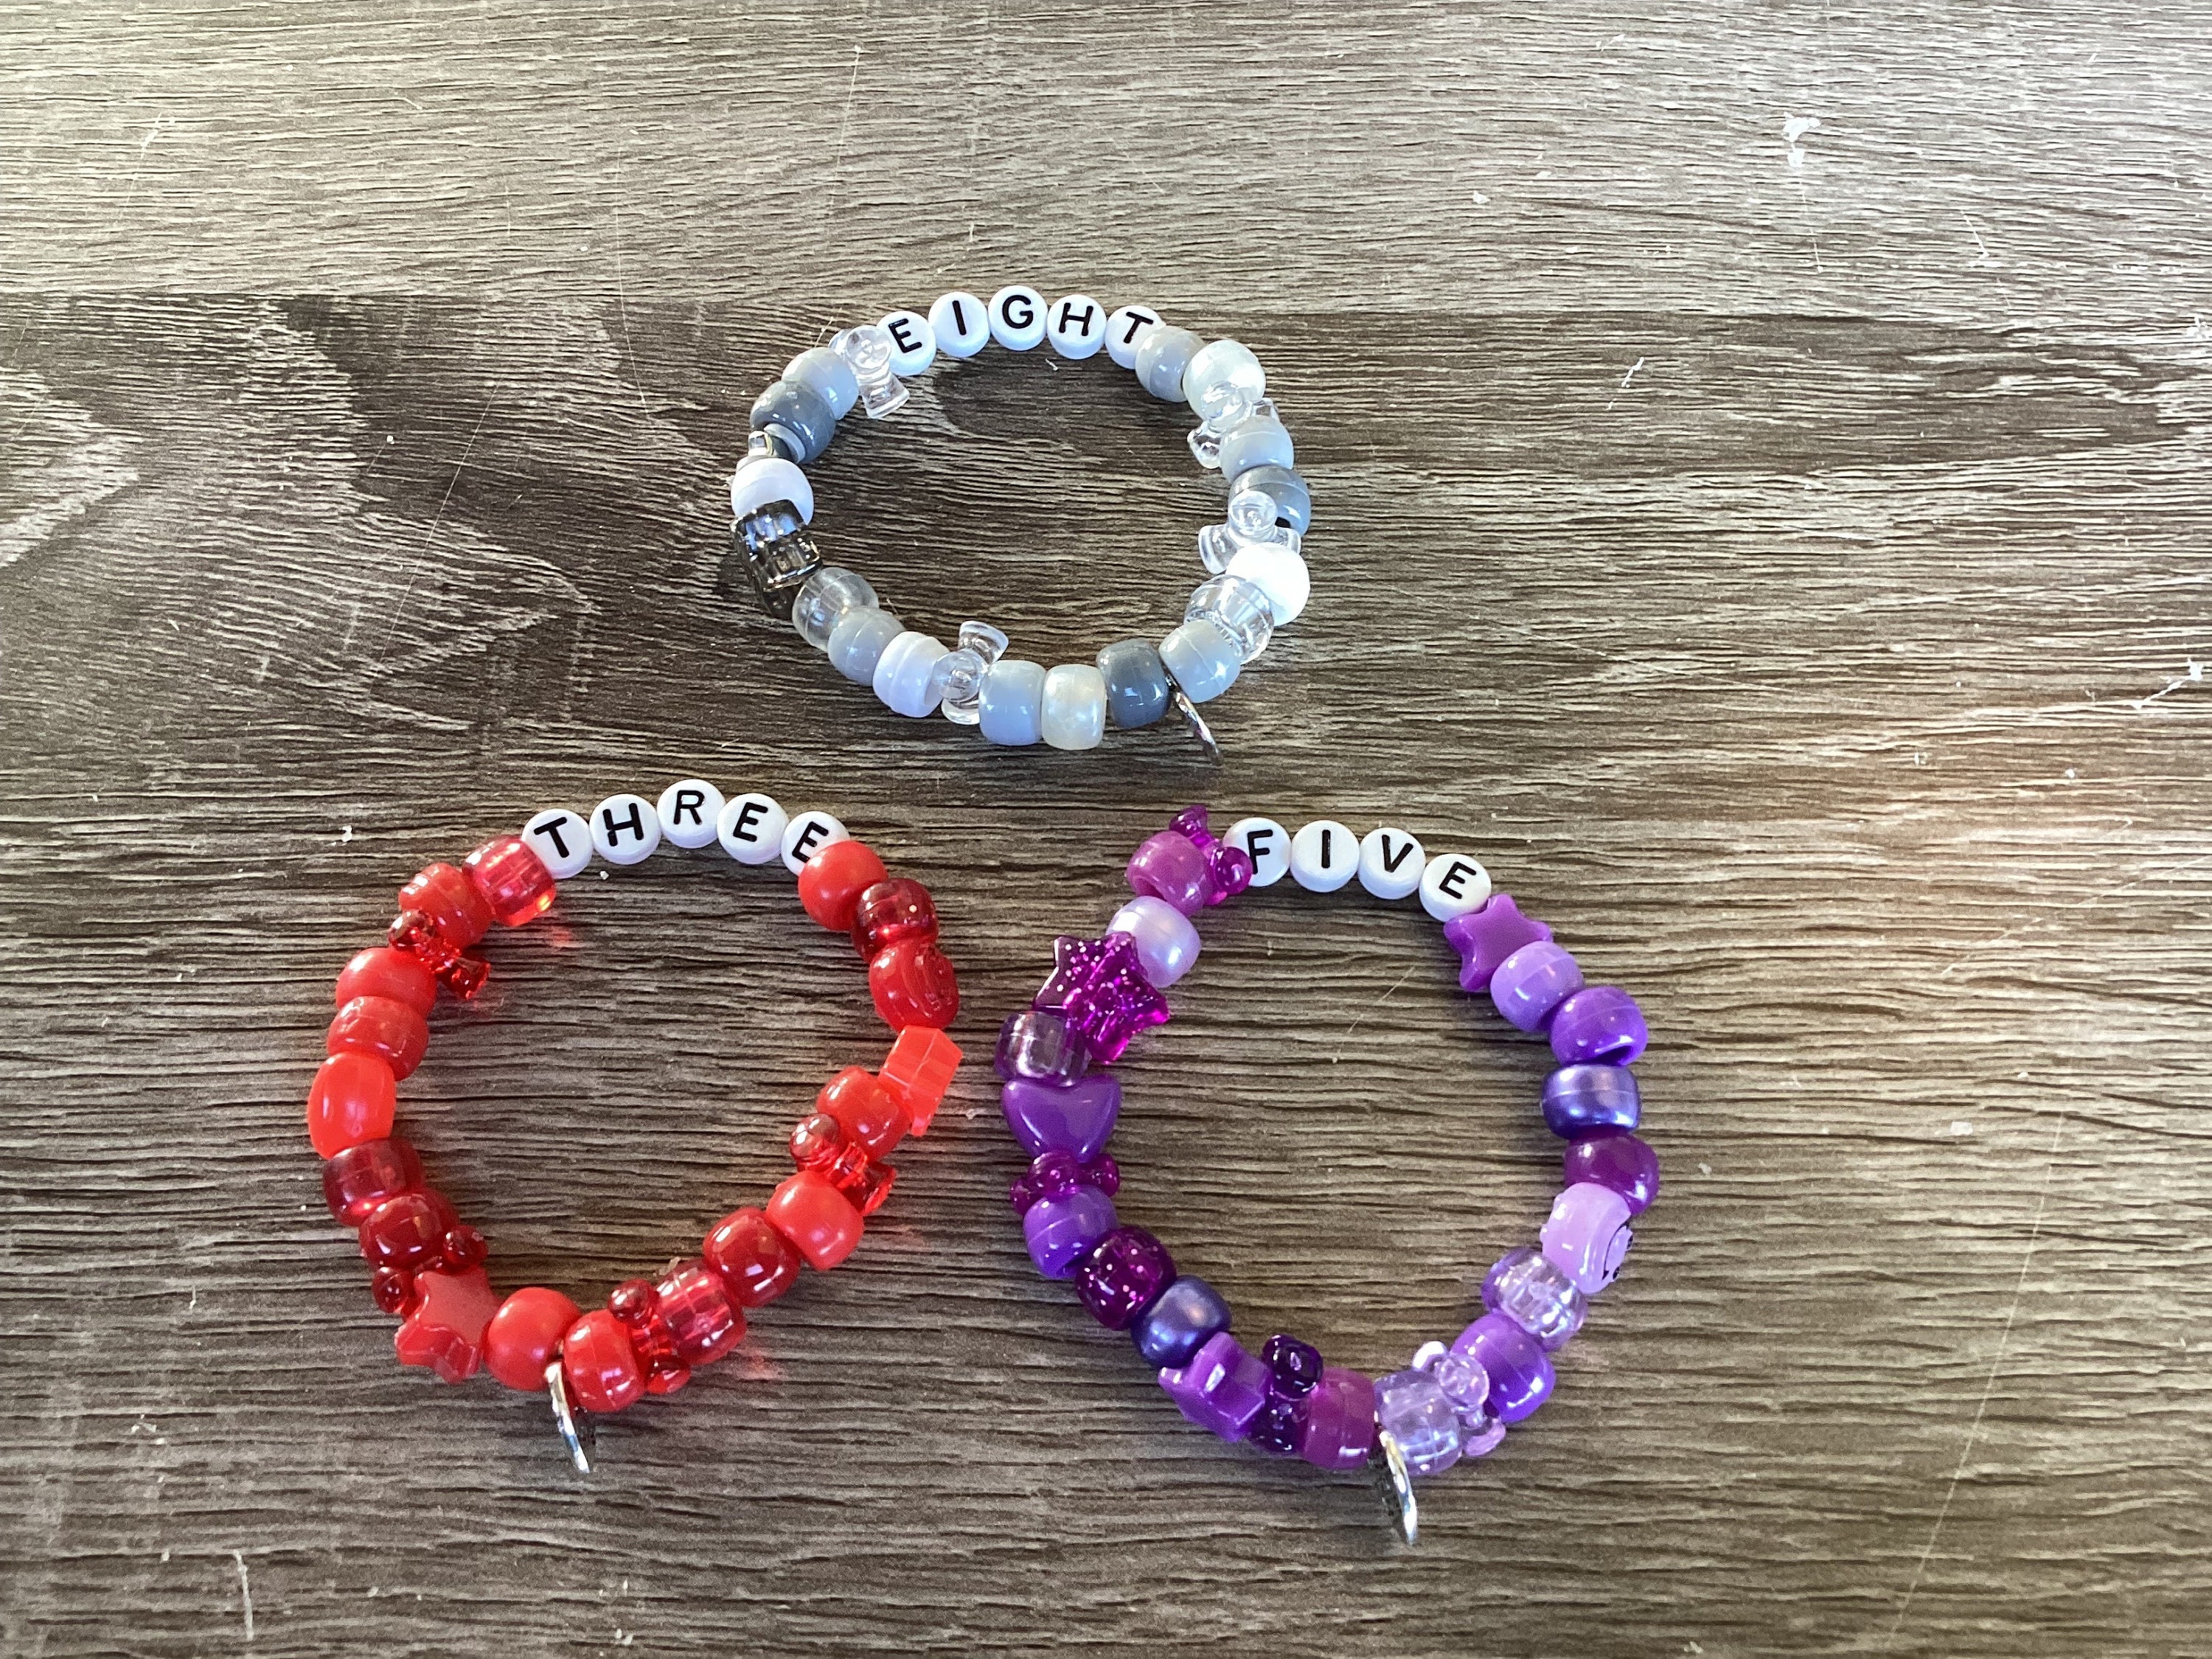 Kandi Singles with Charms Attached by QueenAdrenaline on DeviantArt